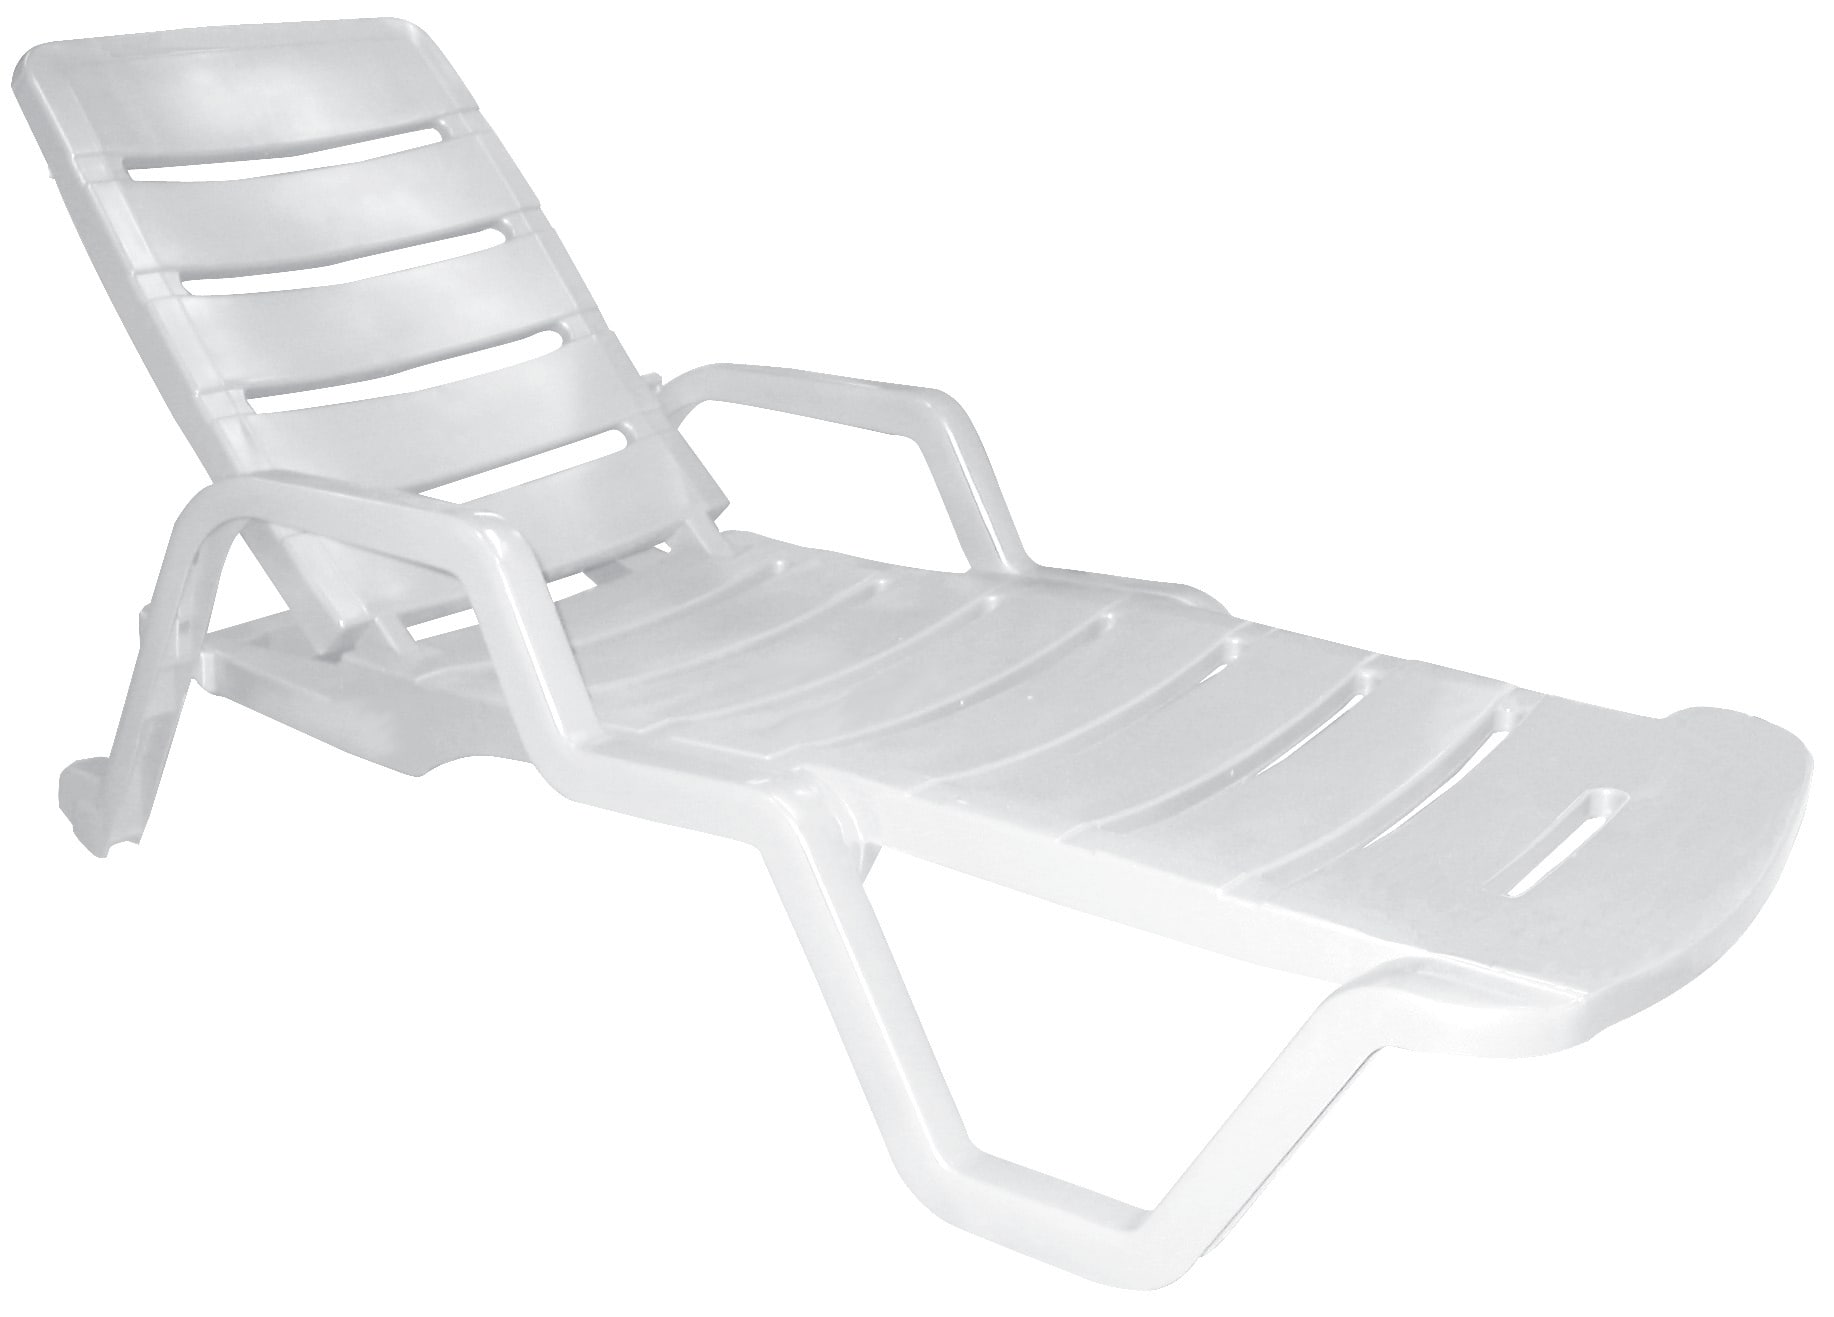 Stationary Chaise Lounge Chair, Pool Chairs Loungers